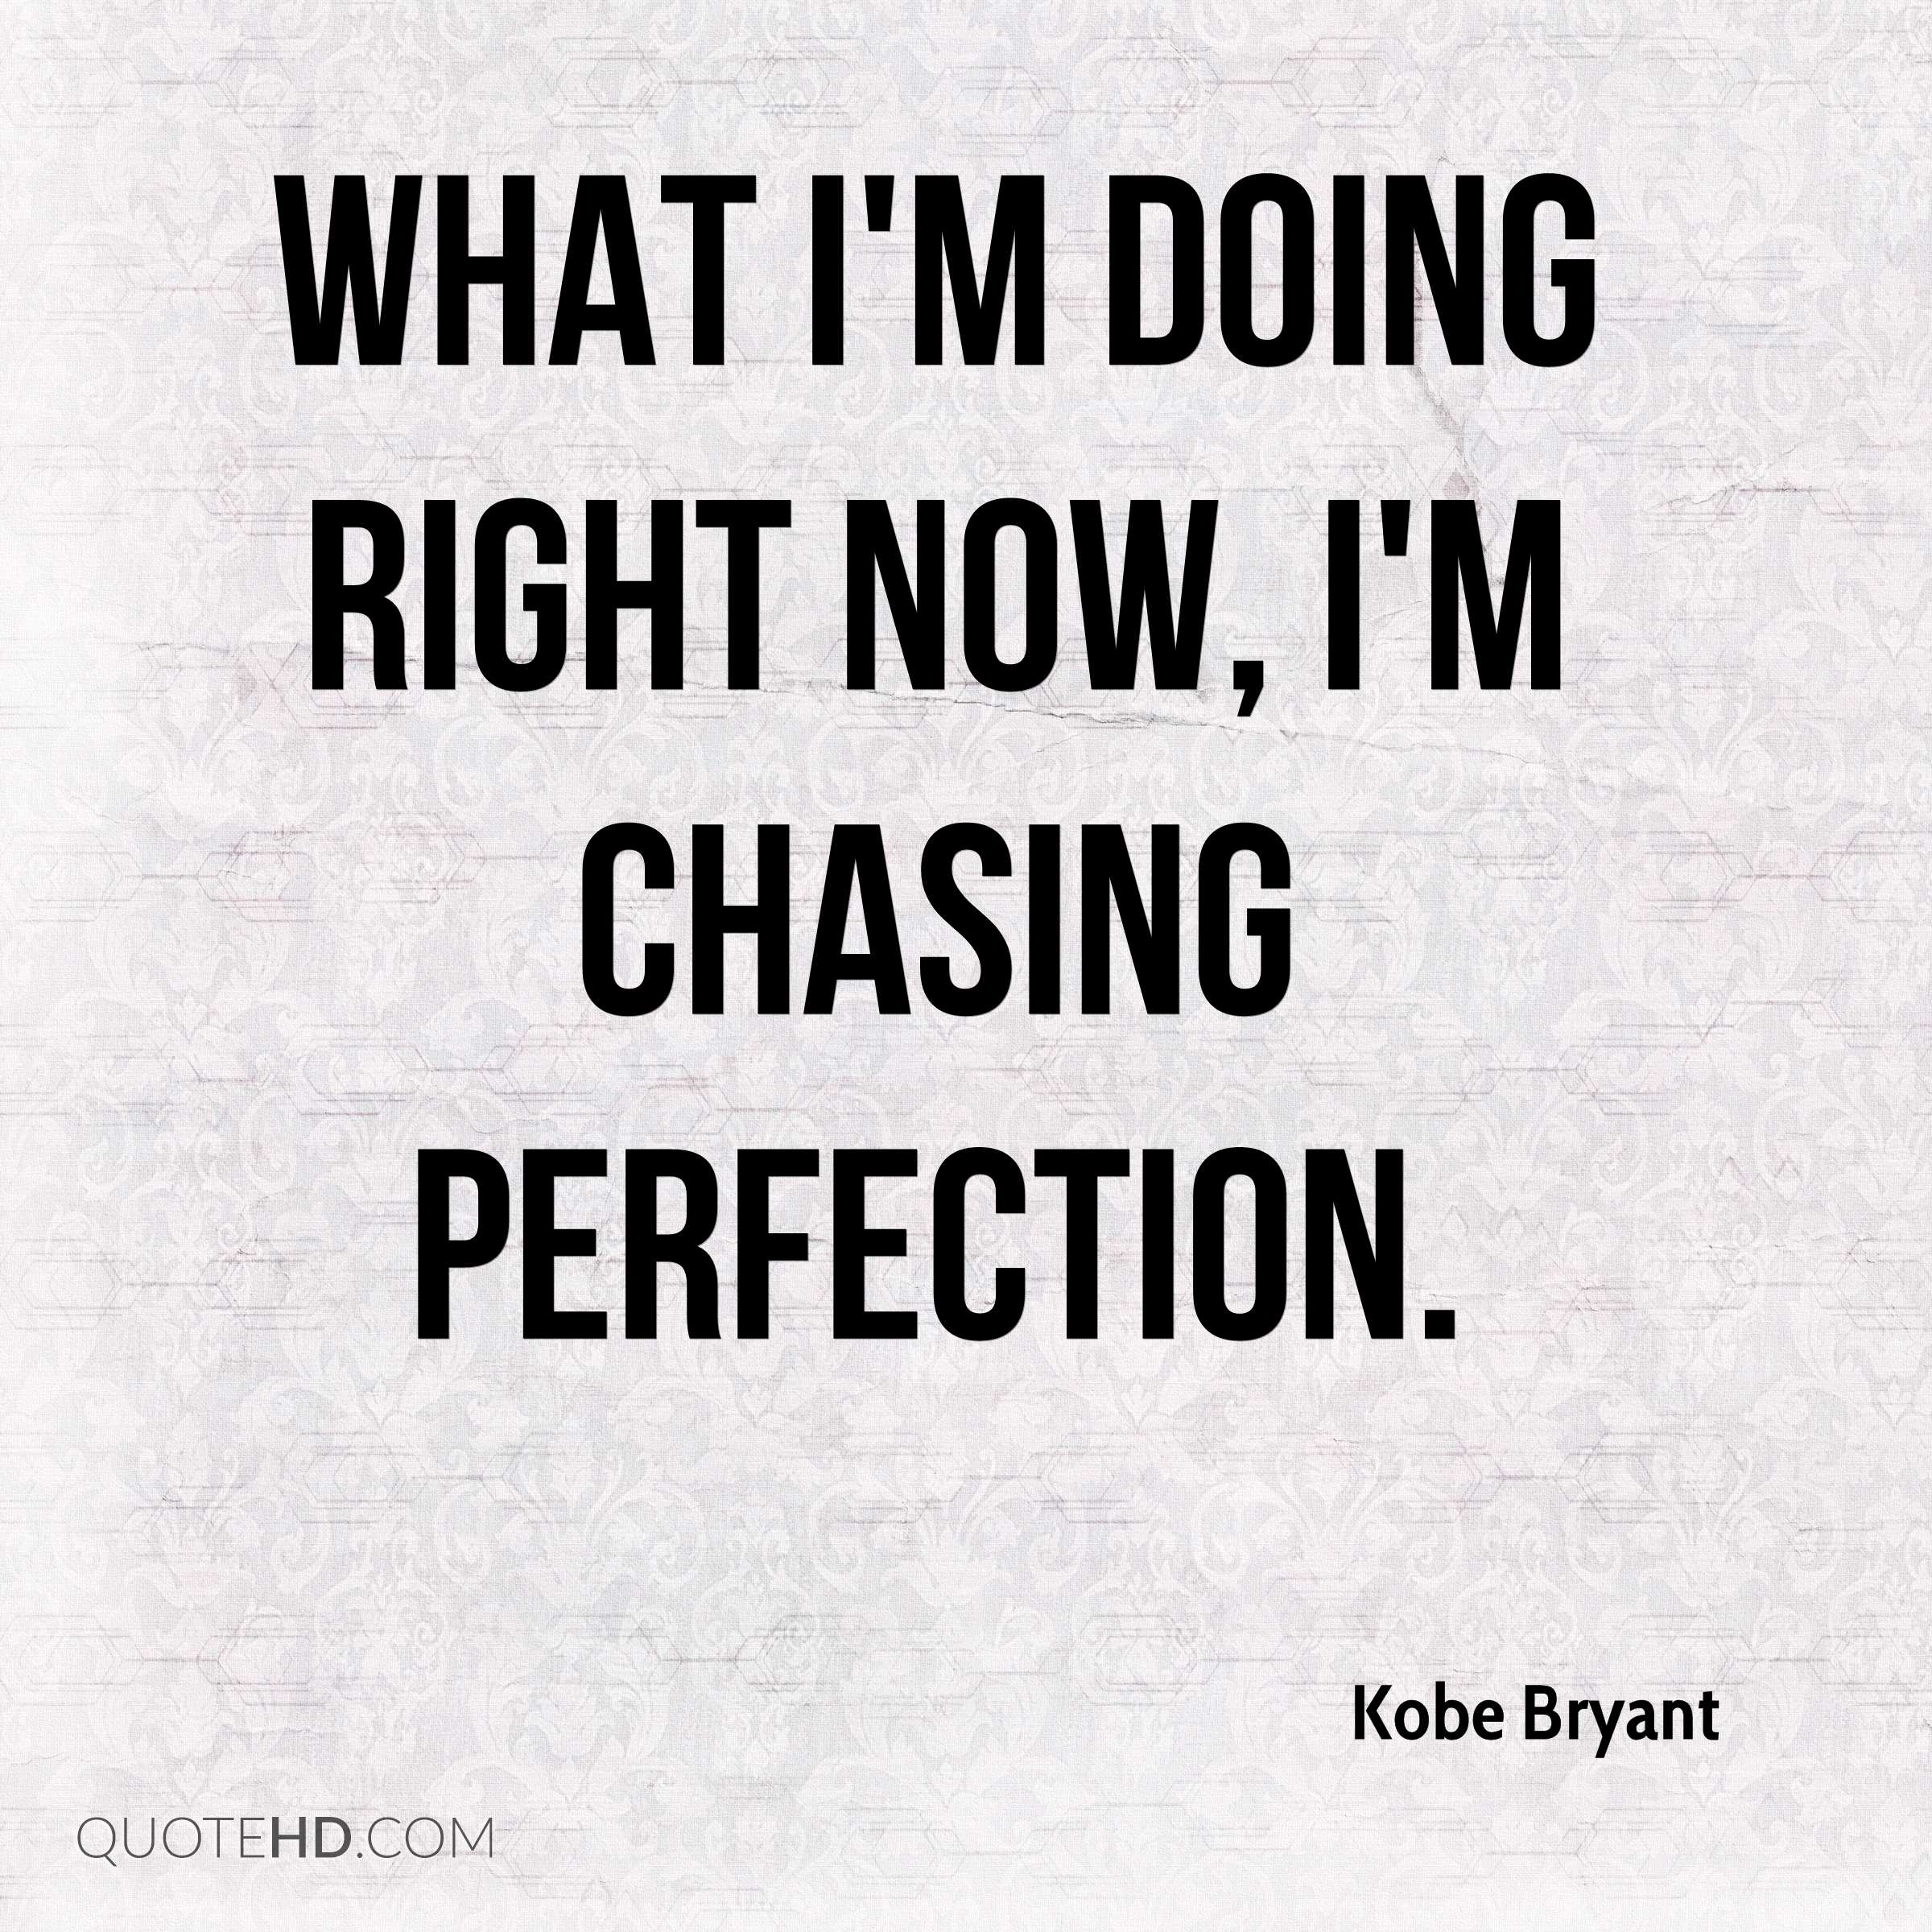 What I'm doing right now, I'm chasing perfection. Kobe Bryant